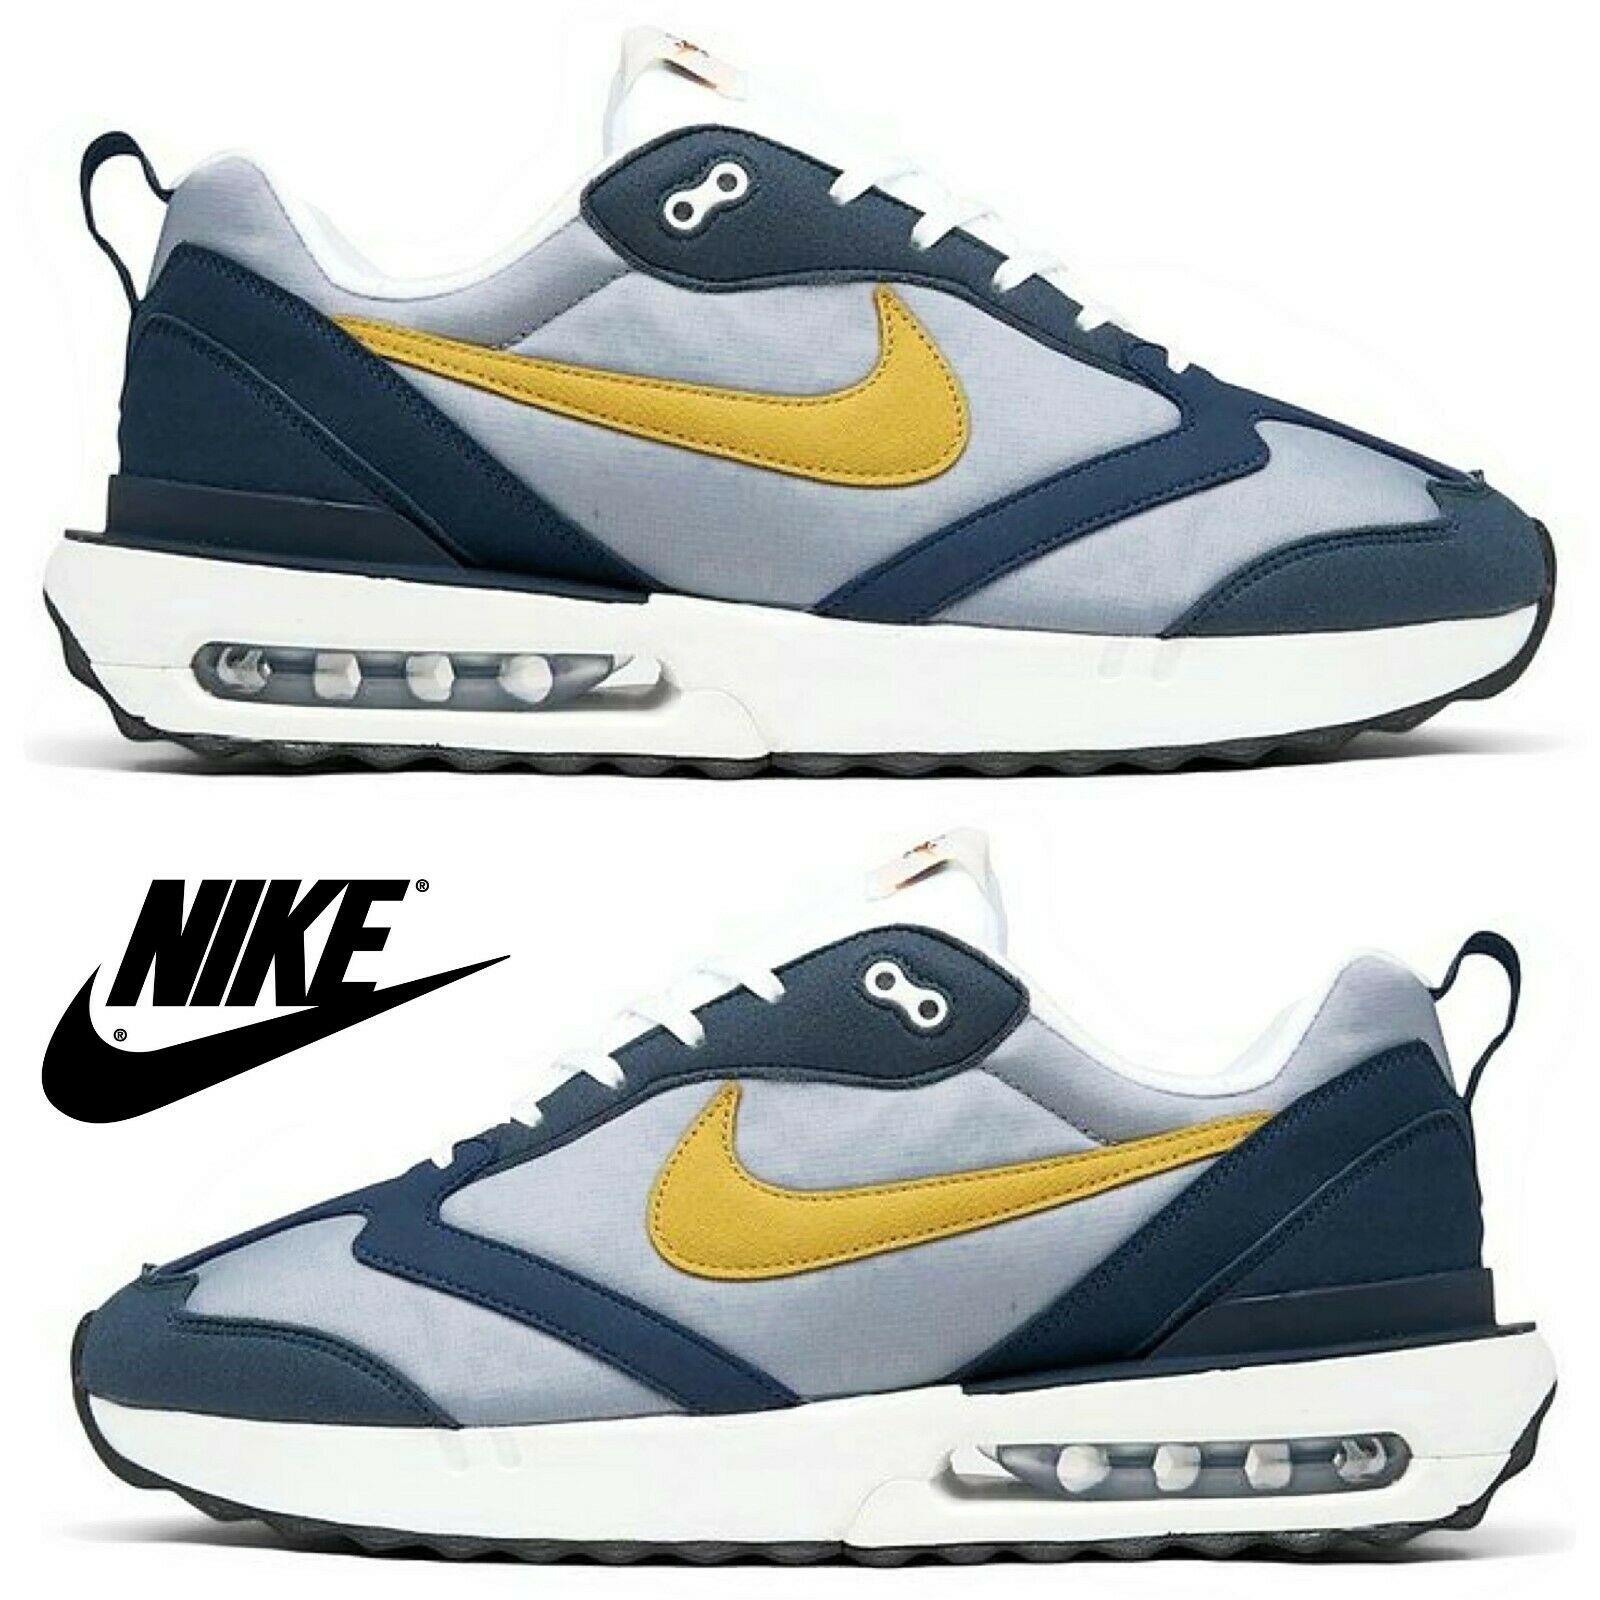 Nike Air Max Dawn Next Nature Men`s Sneakers Running Athletic Comfort Shoes - Blue , Particle Grey/Dark Citron/Armory Navy/Light Bone/B Maufacturer